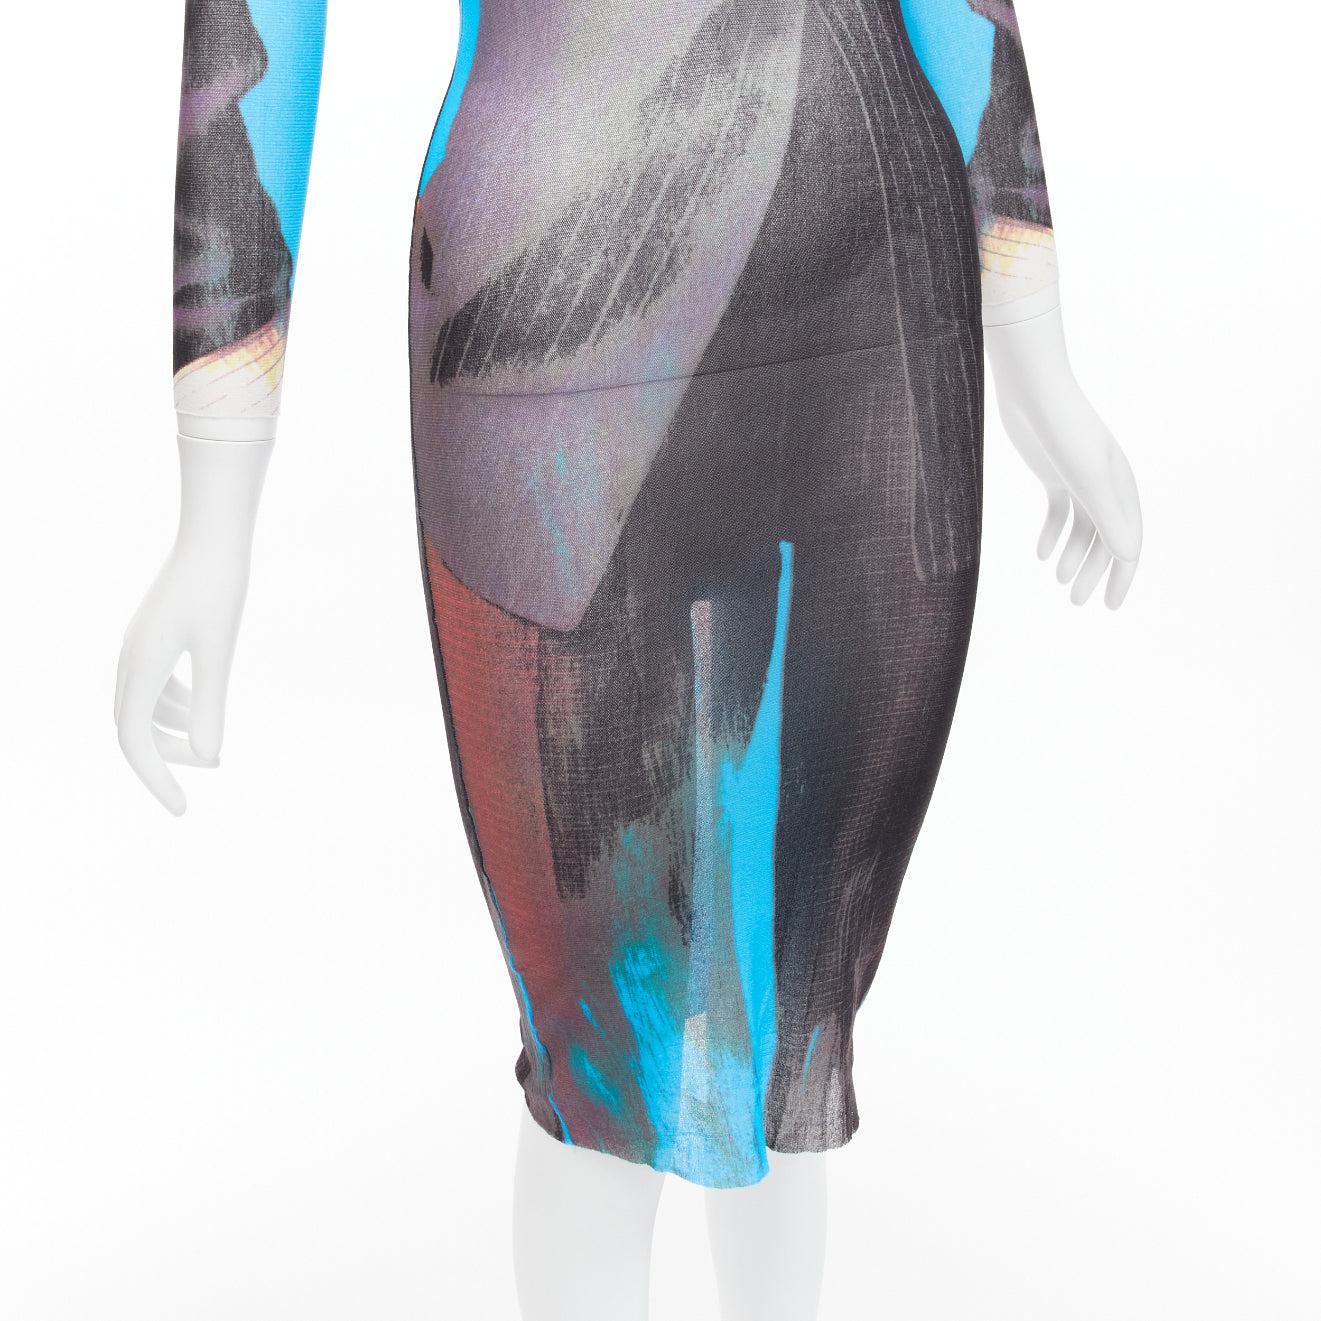 rare JEAN PAUL GAULTIER MAILLE 1997 Vintage Runway tromp loeil body print sheer dress
Reference: TGAS/D00726
Brand: Jean Paul Gaultier
Collection: MAILLE S/S 1997 - Runway
Material: Polyamide
Color: Blue, Multicolour
Pattern: Photographic